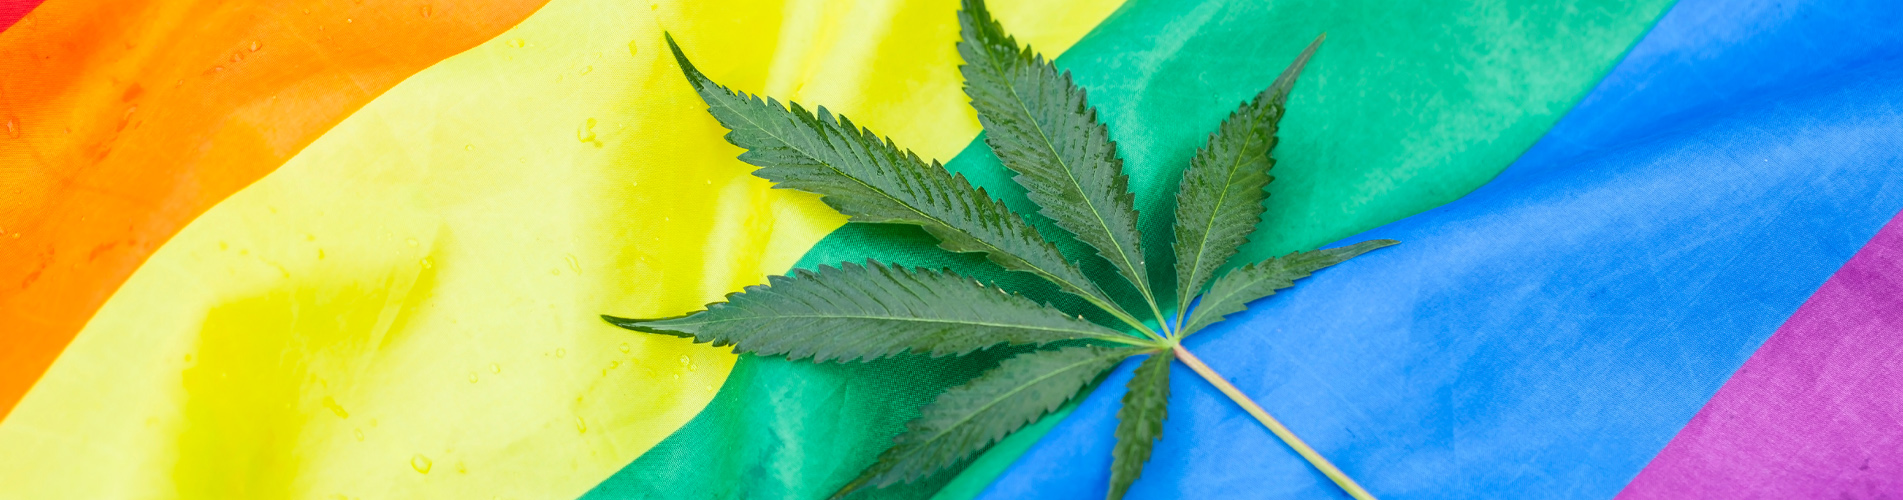 Introducing the Queer Cannabis Club - Industry’s First LGBTQ-led Consortium